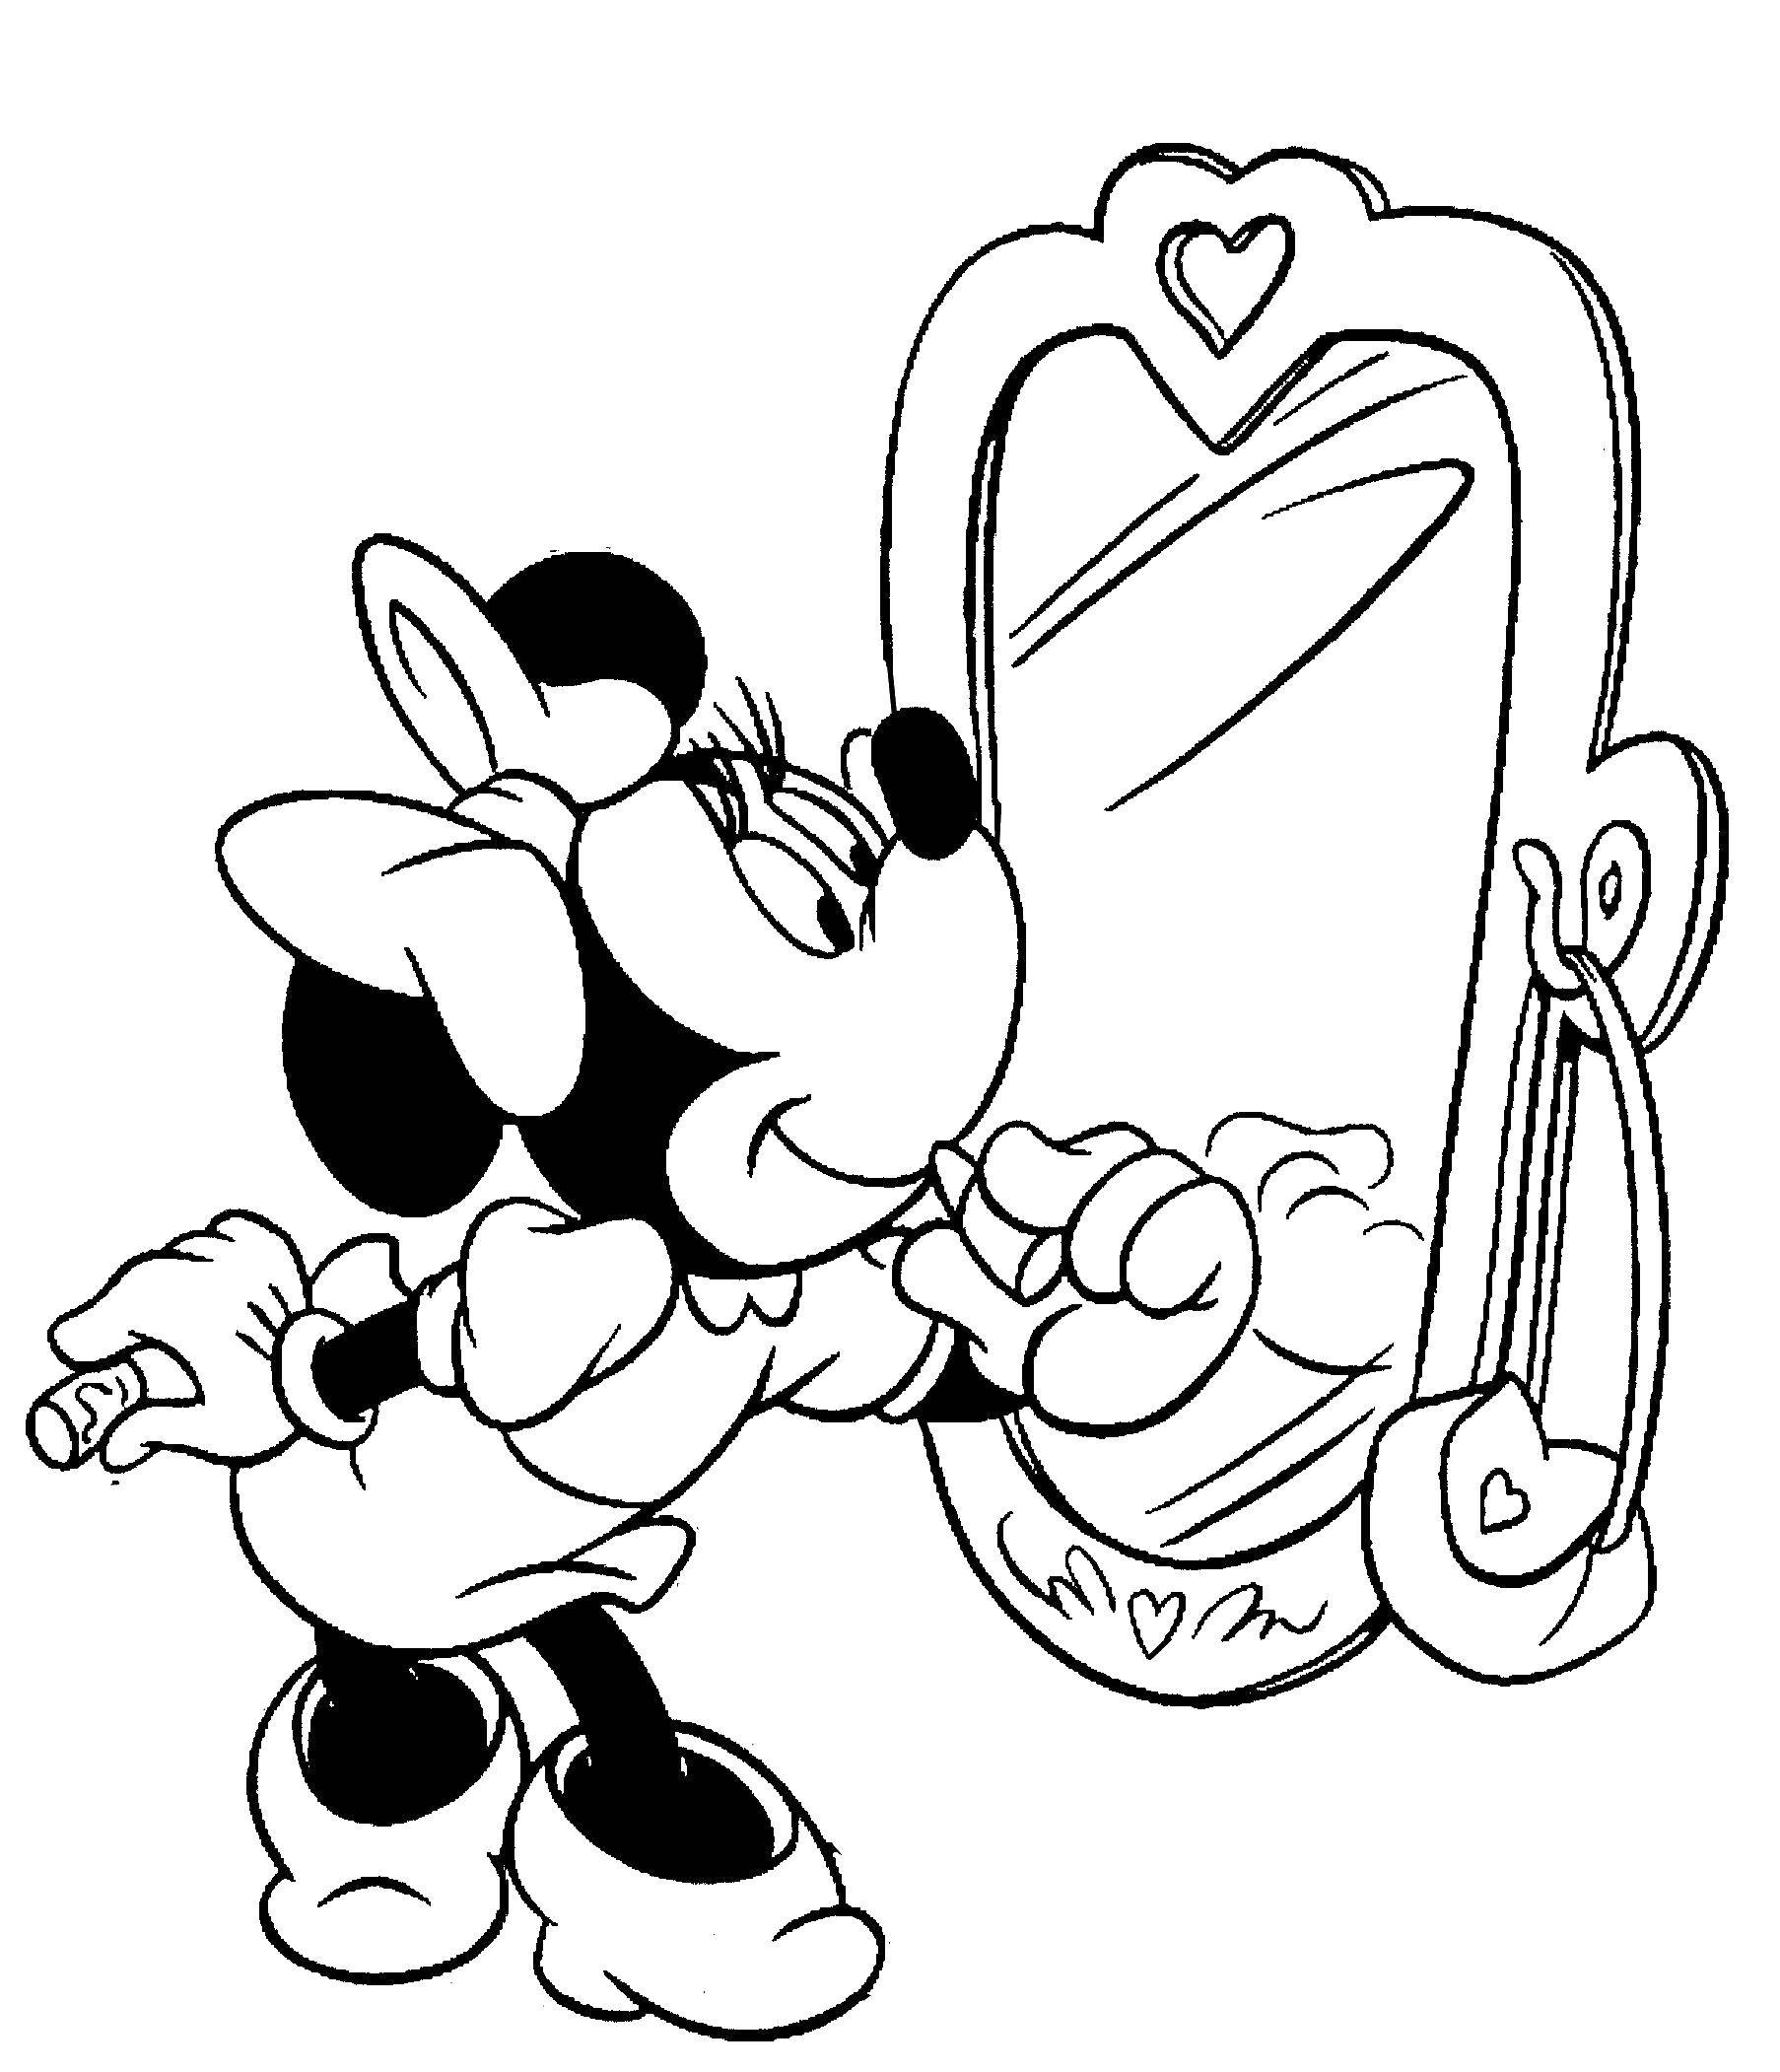 Coloring Minnie mouse preening. Category Disney cartoons. Tags:  Disney, Mickey Mouse, Minnie Mouse.